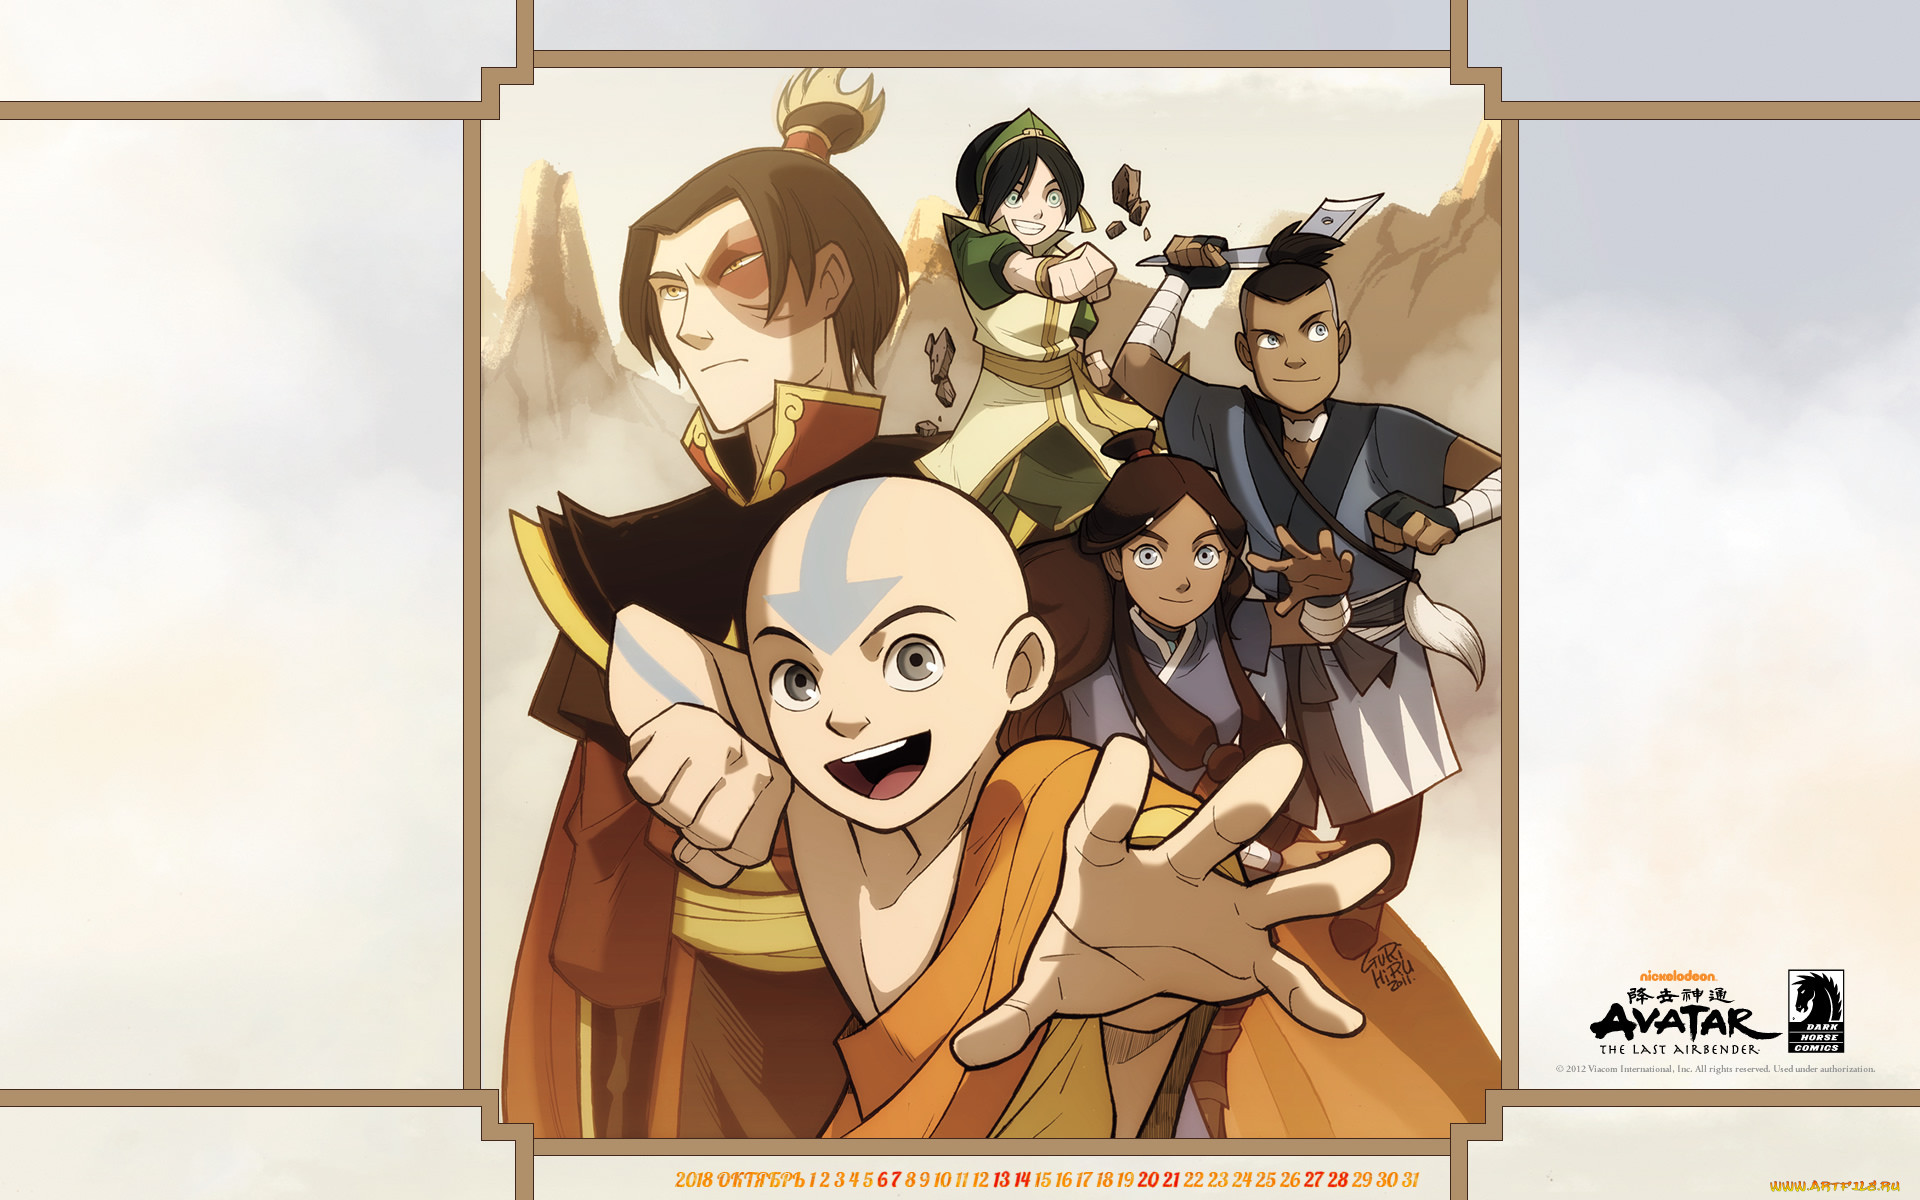 Avatar legend of aang english. Avatar the last Airbender. Аватар аанг Постер.